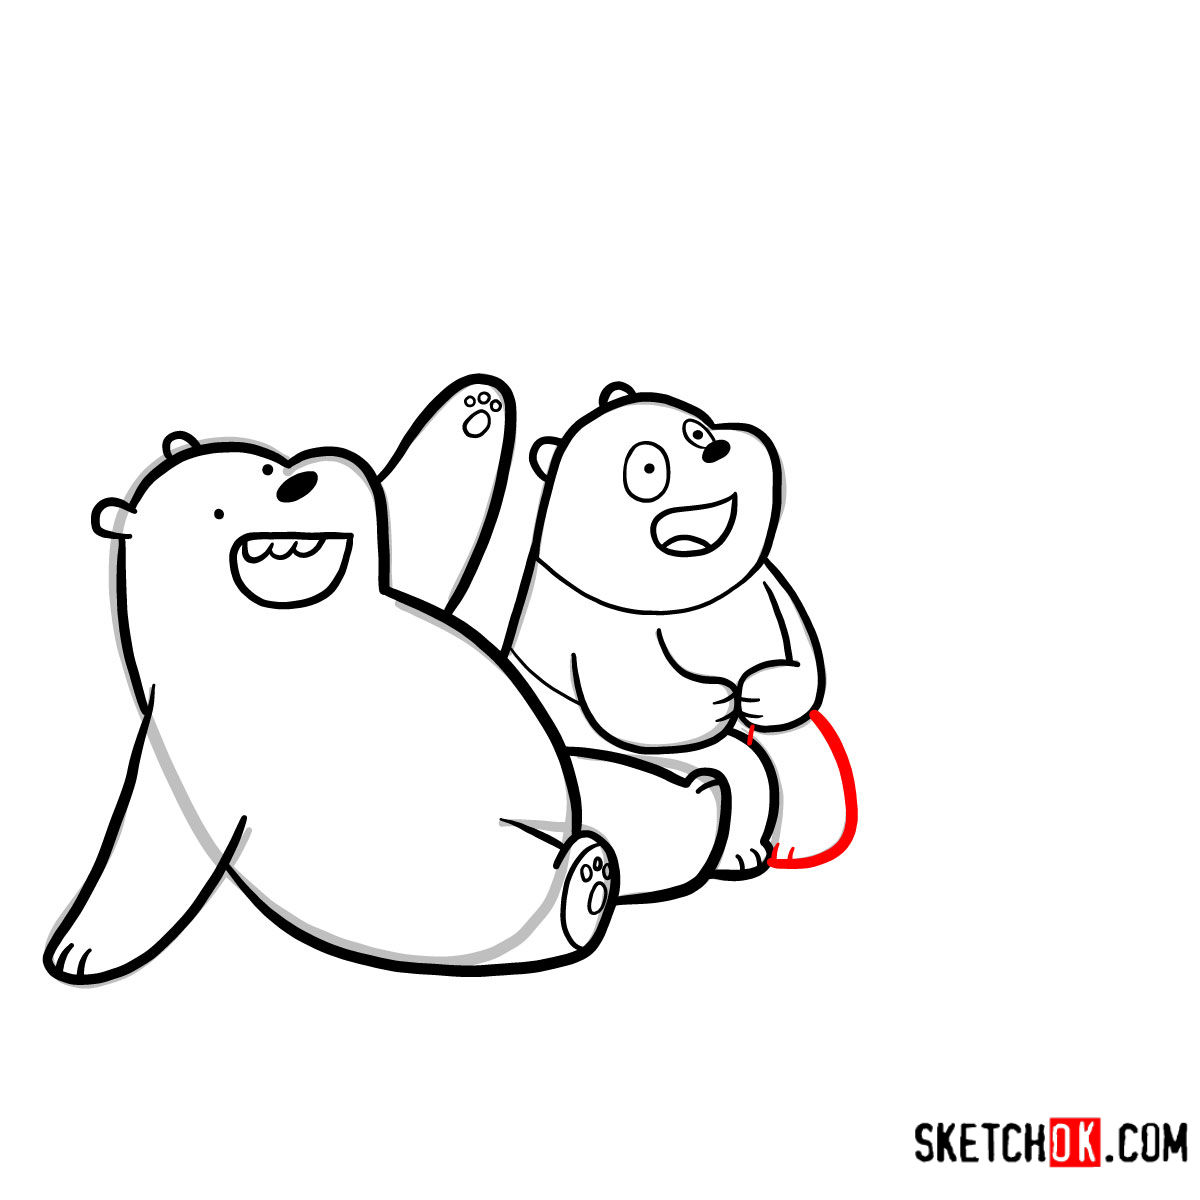 How to draw all three bears together | We Bare Bears - step 14